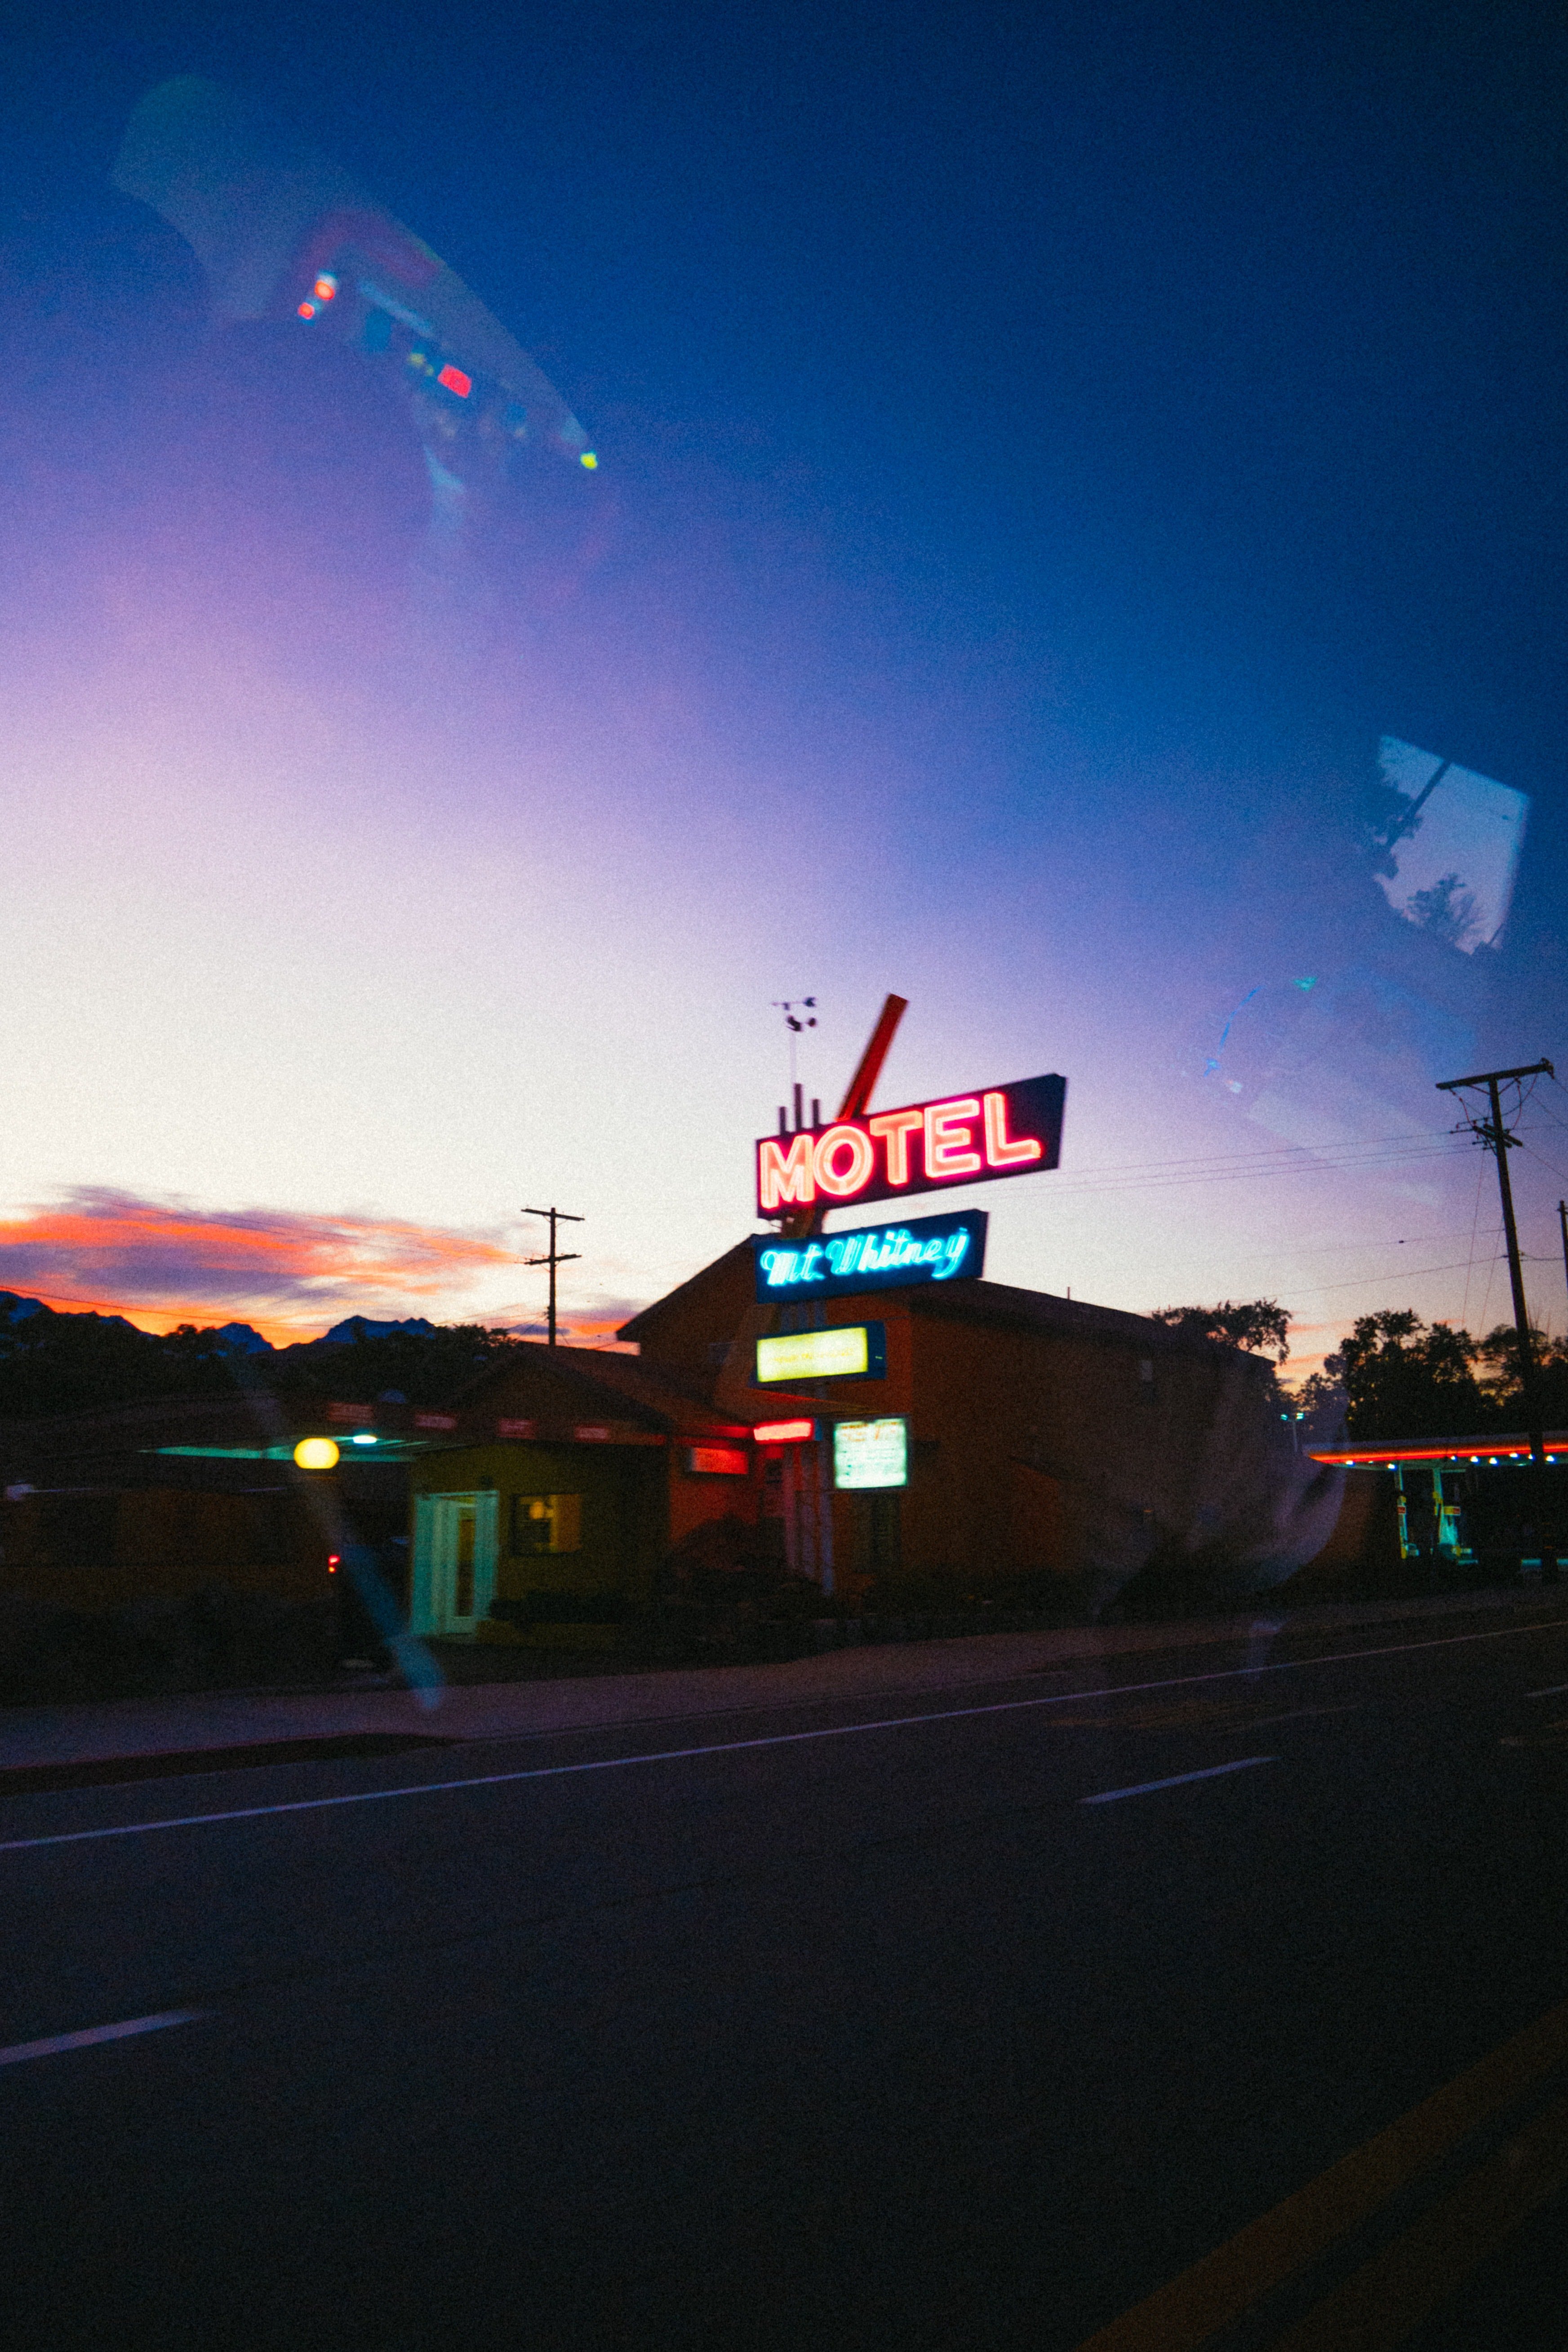 Unable to face Cheryl and my father, I drove to a motel nearby for the night | Source: Pexels